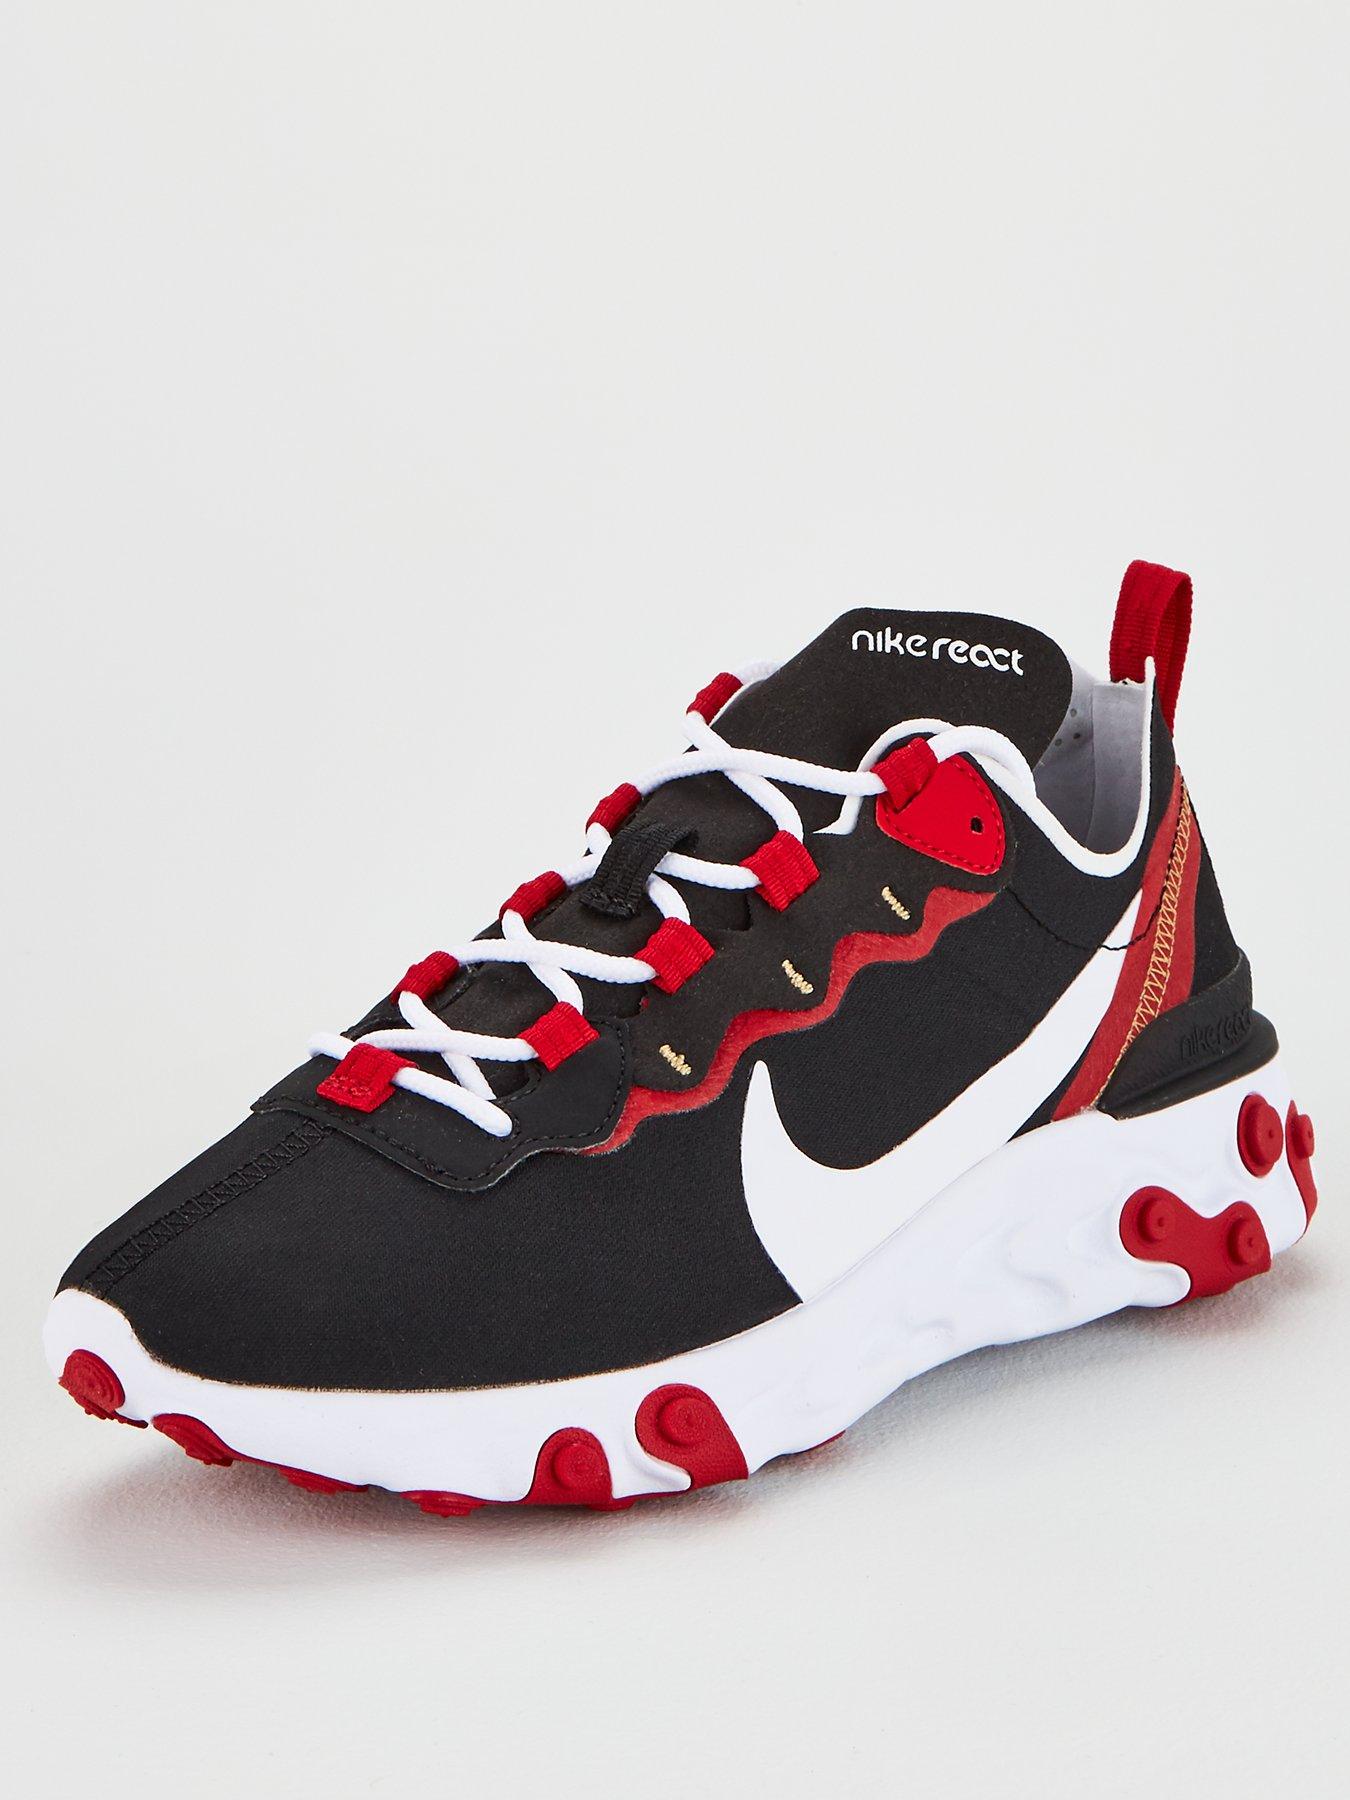 nike react 55 black and red